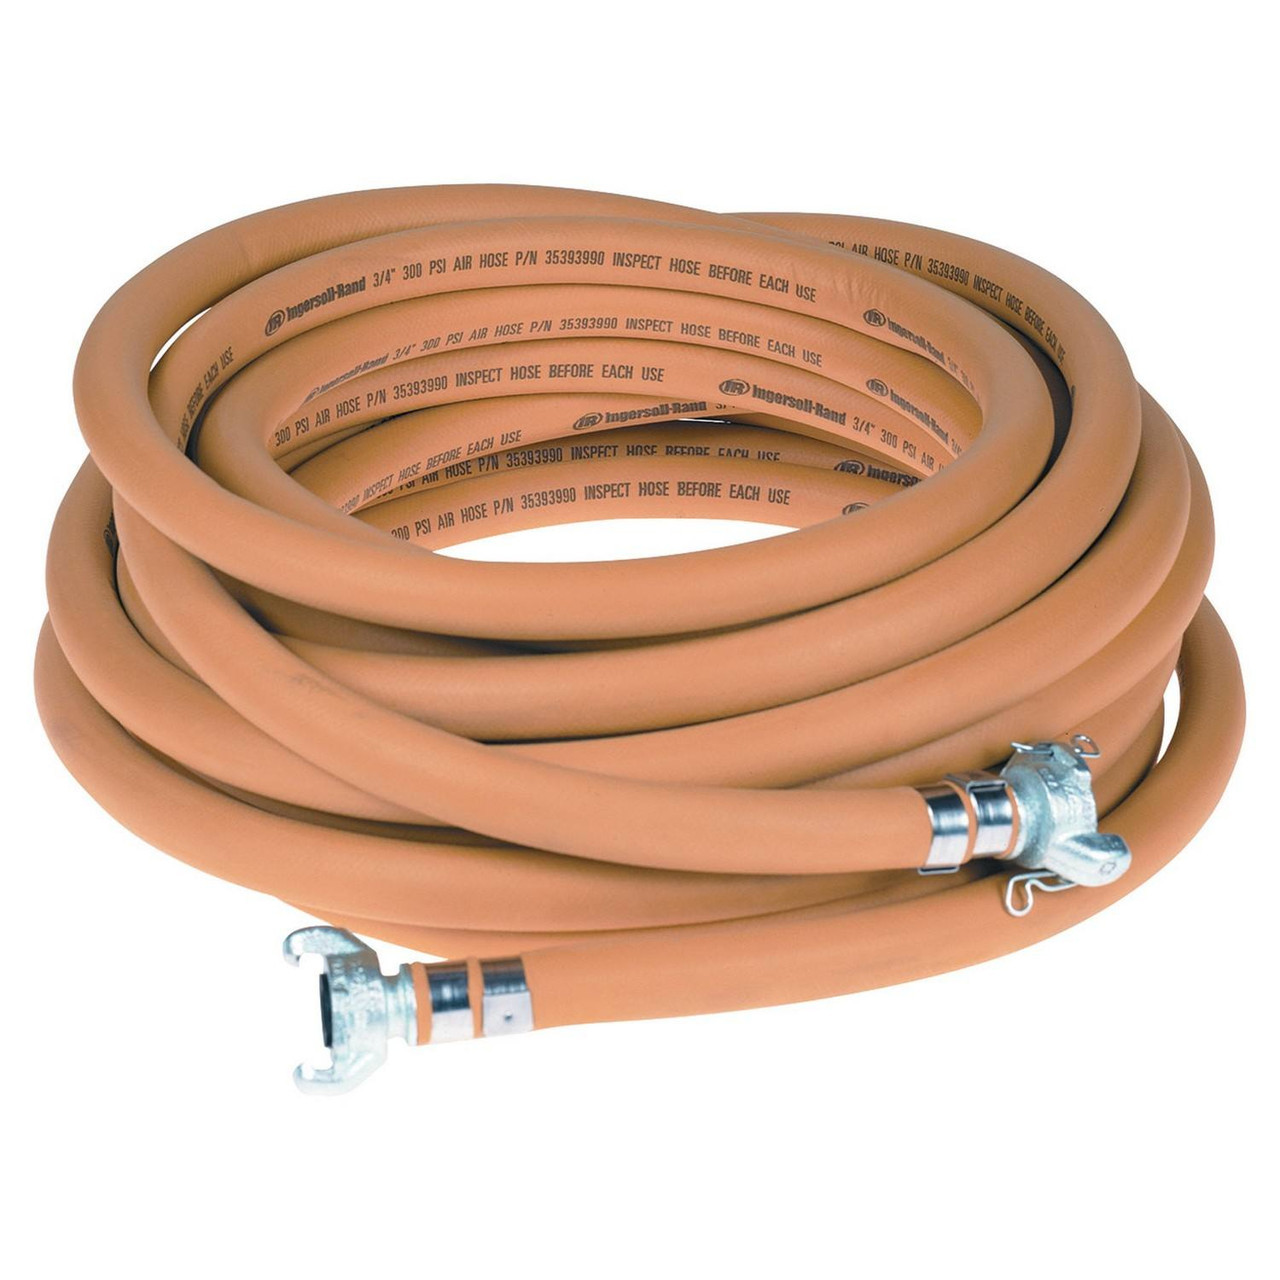 Ingersoll Rand 3/4 Air Hose, 22040679 Double-Banded Universal Air Hose, Both Ends